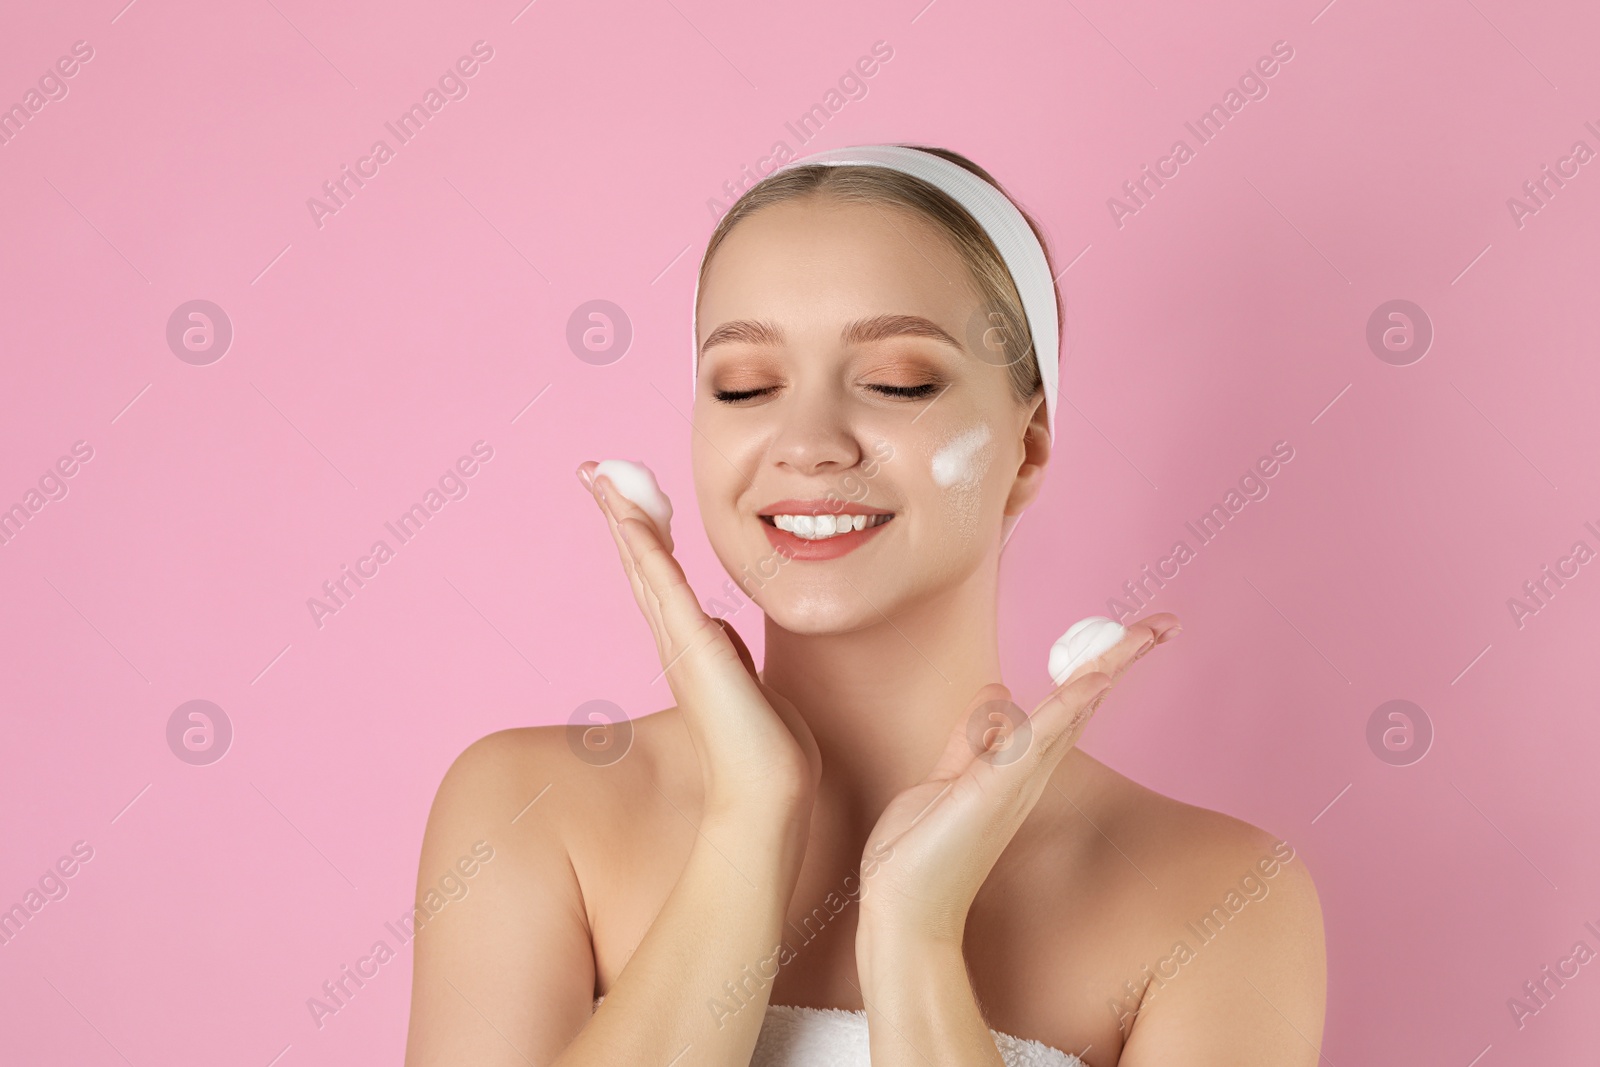 Photo of Young woman washing face with cleansing foam on pink background. Cosmetic product